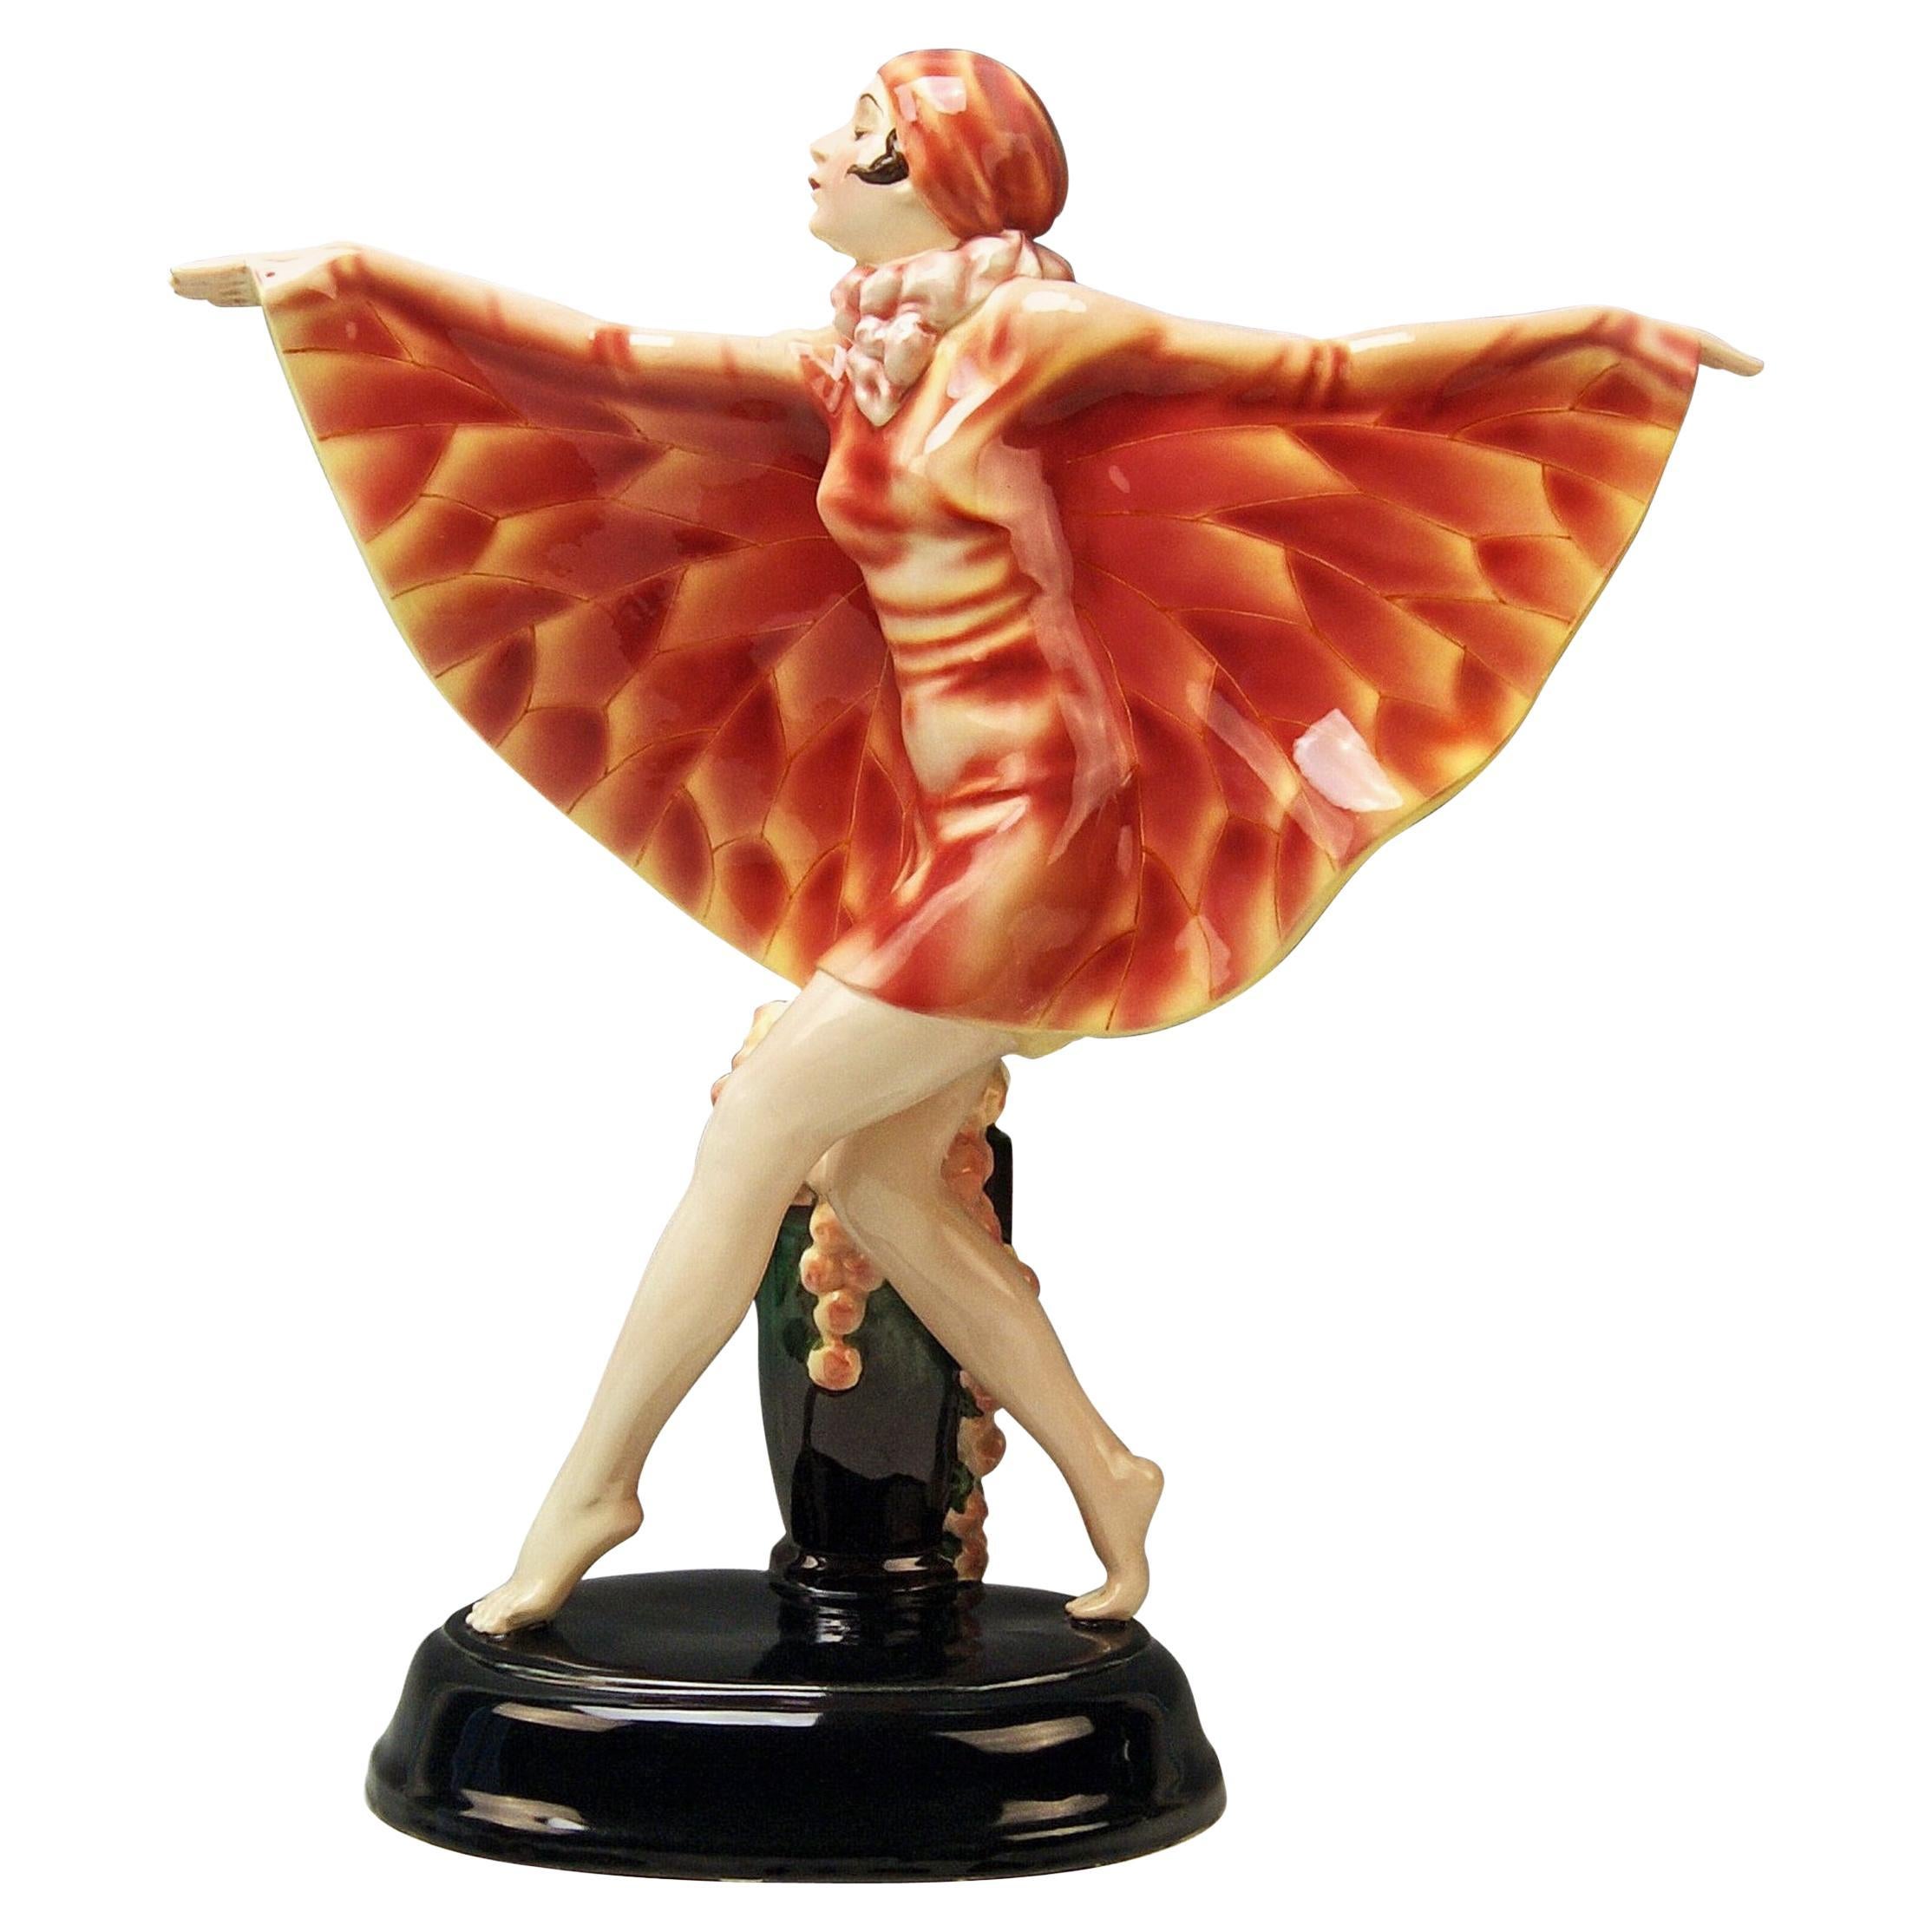 Goldscheider Vienna gorgeous dancing lady figurine: The Captured Bird

Designed by Josef Lorenzl (1892-1950) / one of the most important designers having been active for Goldscheider manufactory in period of 1920-1940 / designed 1922 (quite